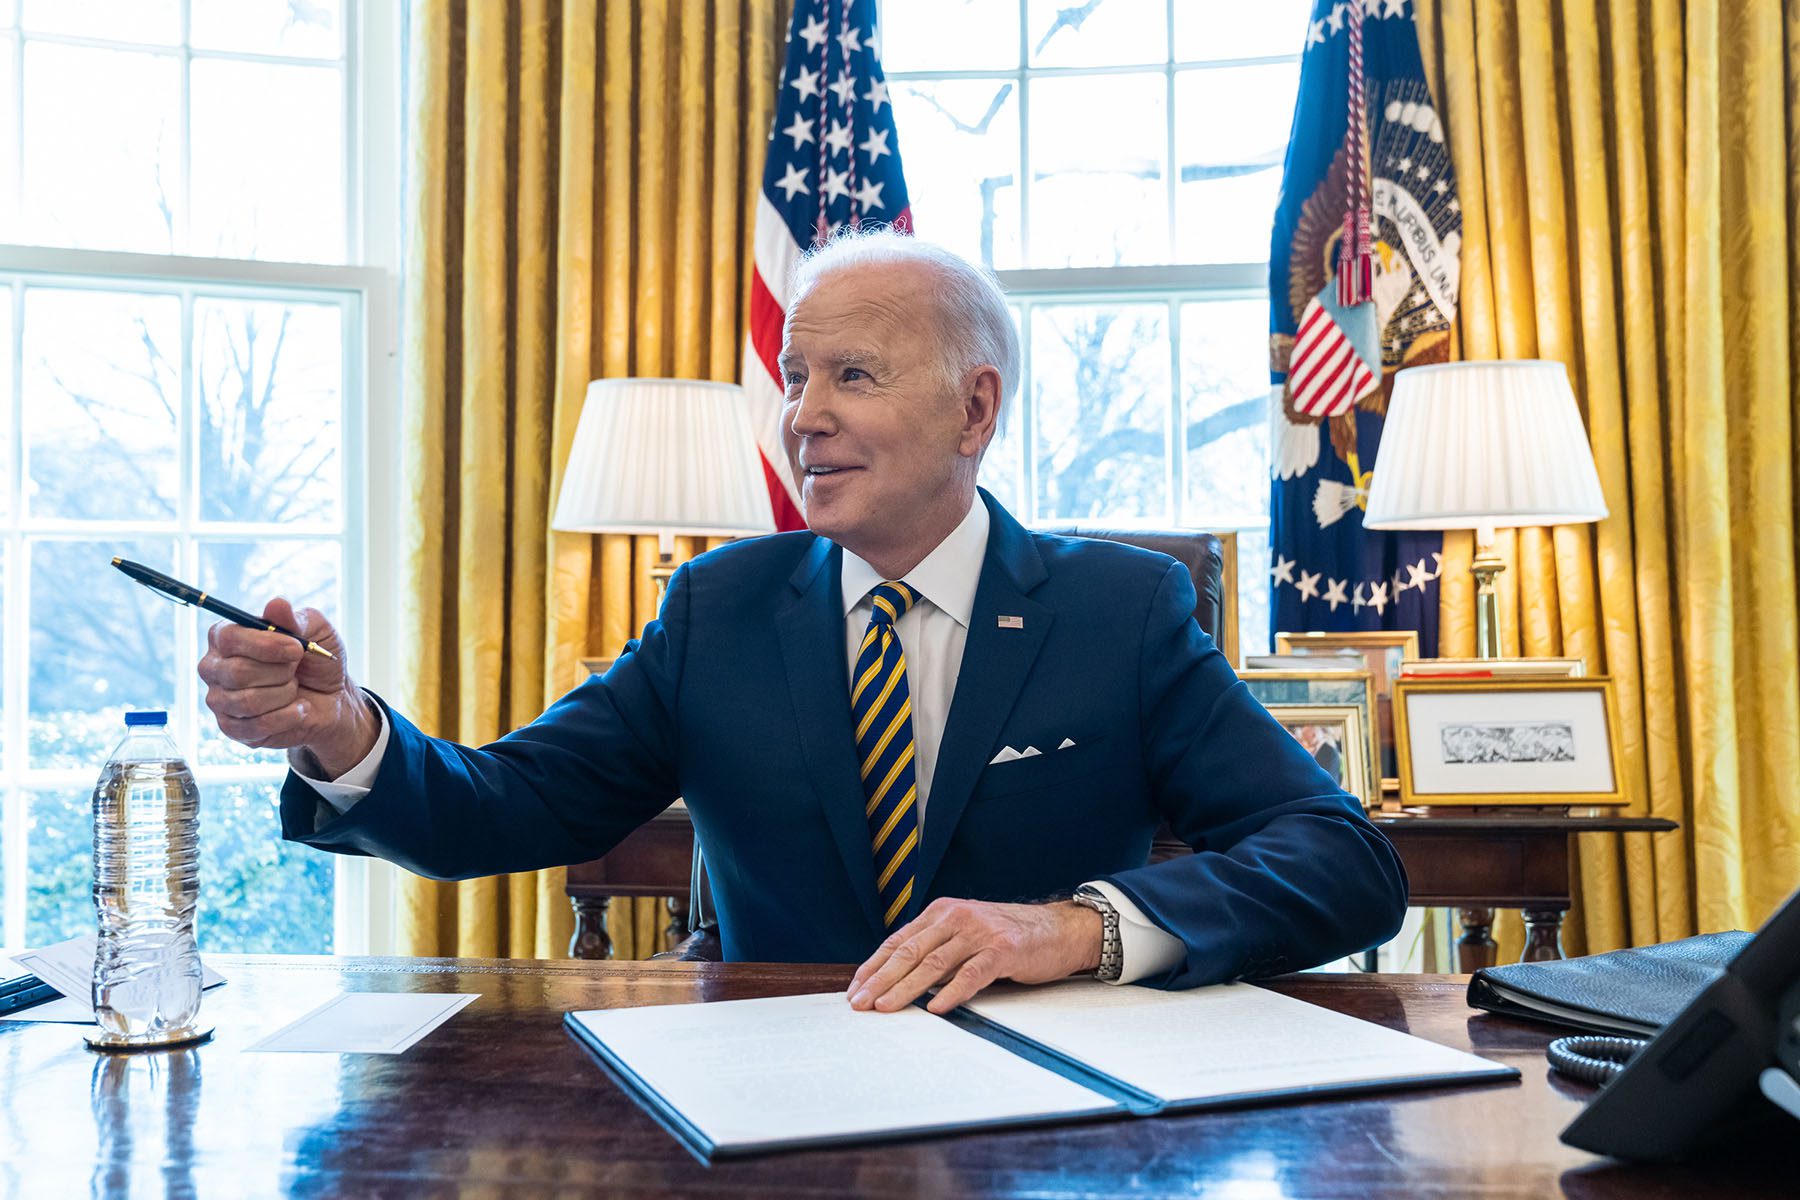 President Biden signs an Executive Order in the Oval Office of the White House.